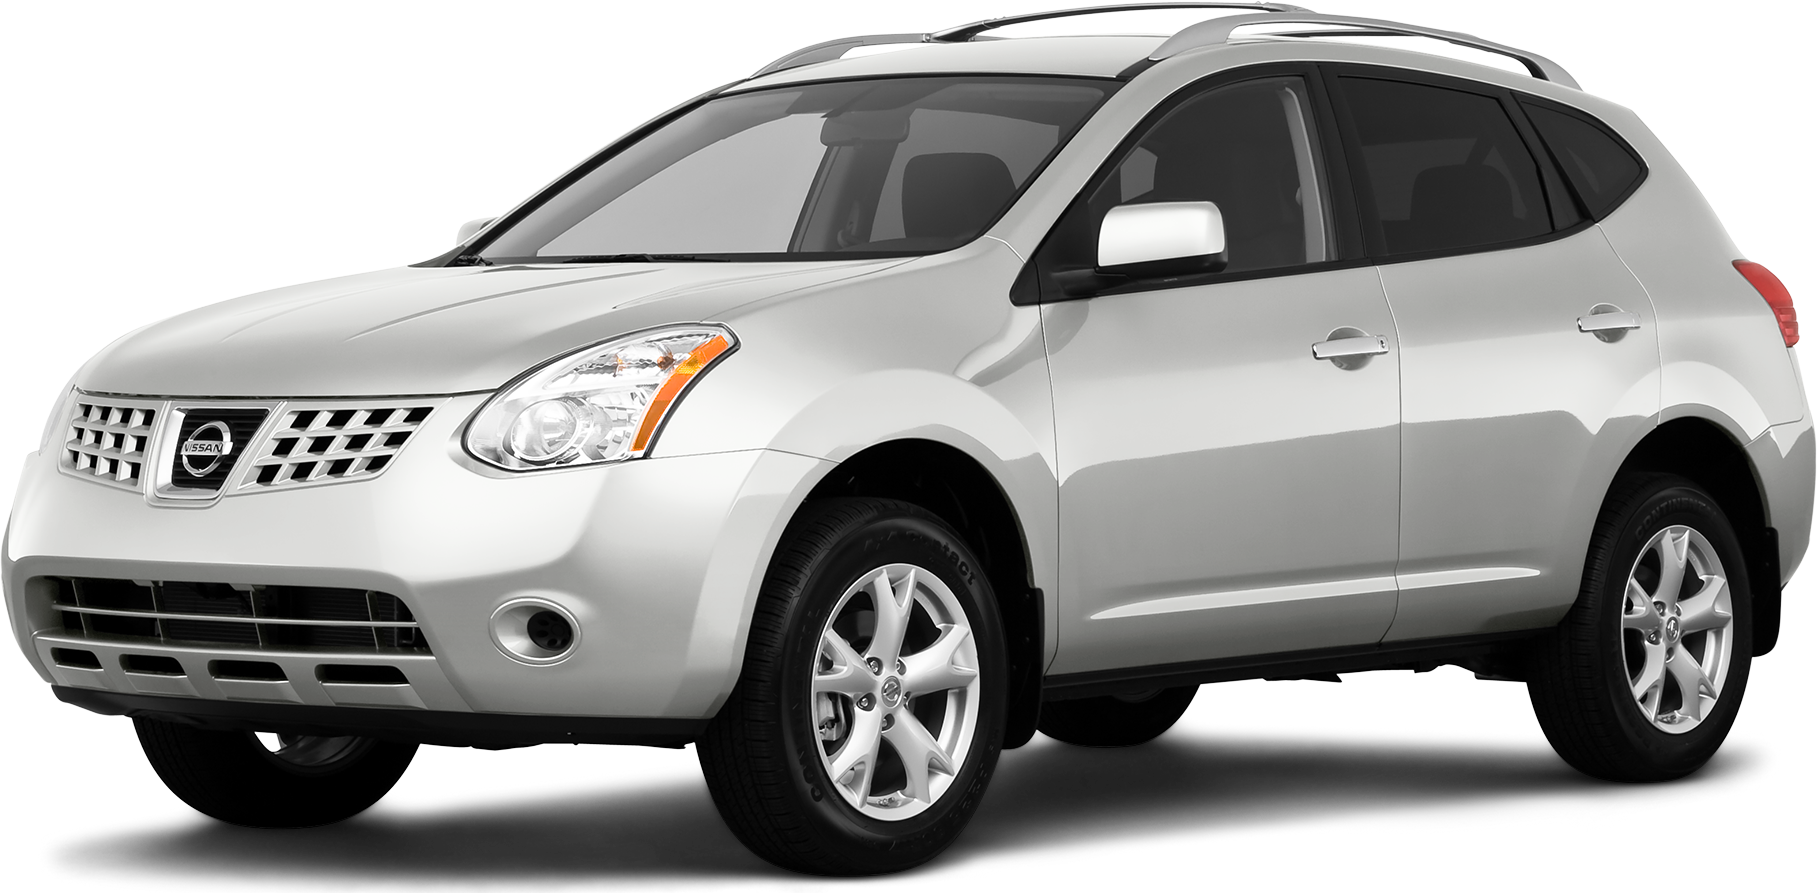 2010 Nissan Rogue Values & Cars for Sale | Kelley Blue Book